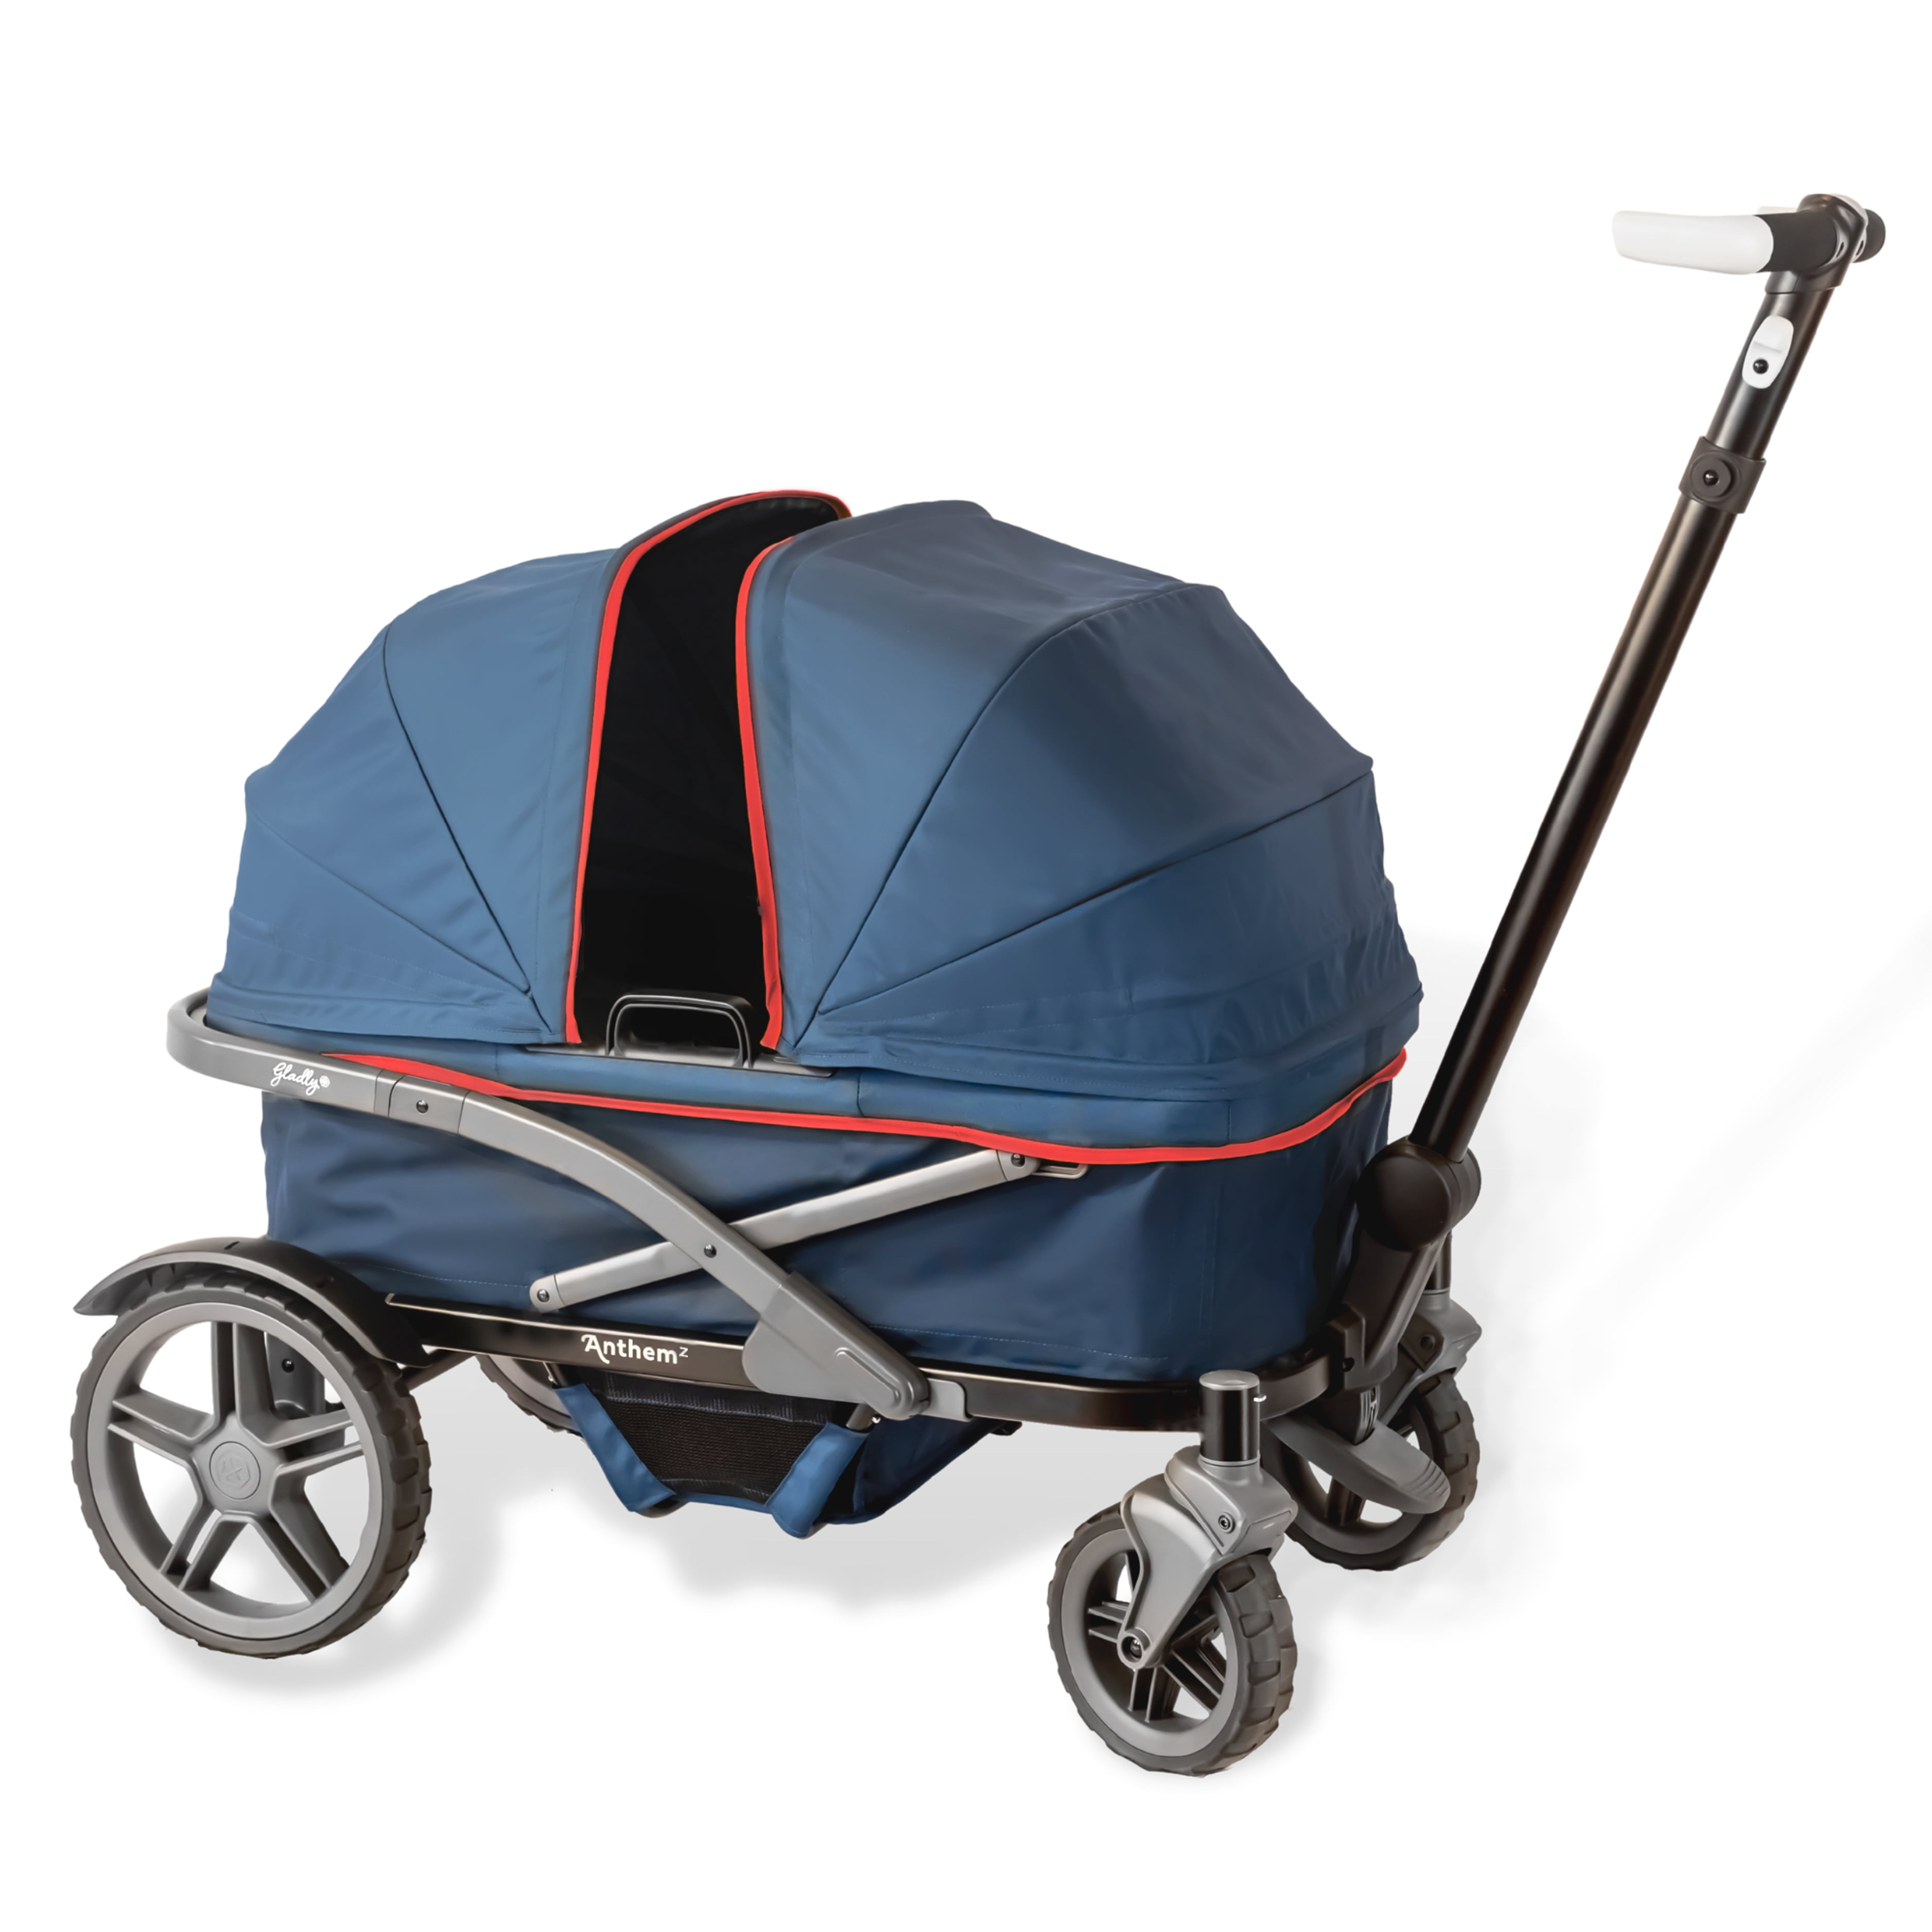 Product – Zille strollers for Generation Z